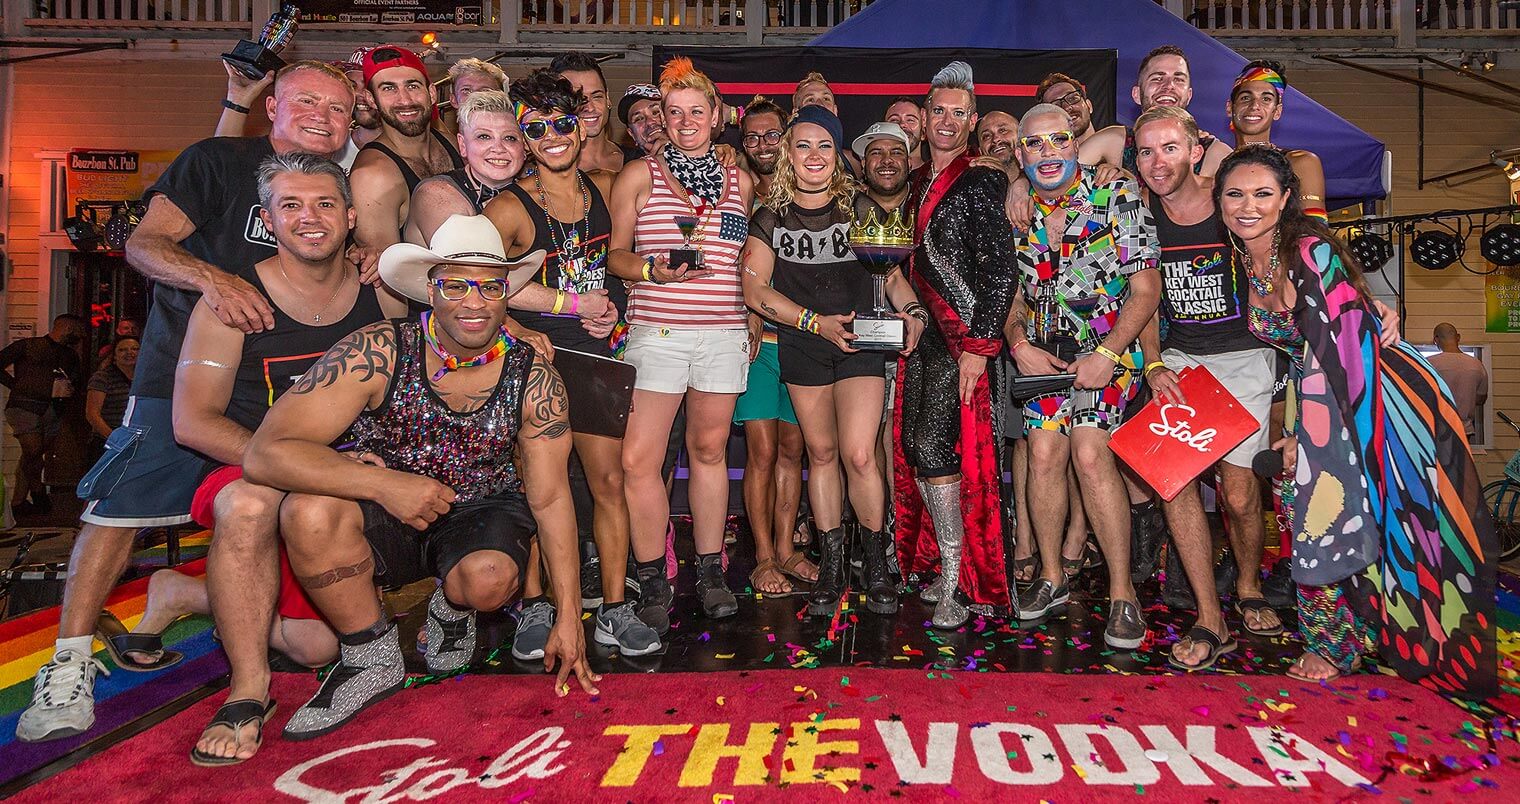 NYC Bartender Wins World's Largest LGBT Bartending Competition, featured image